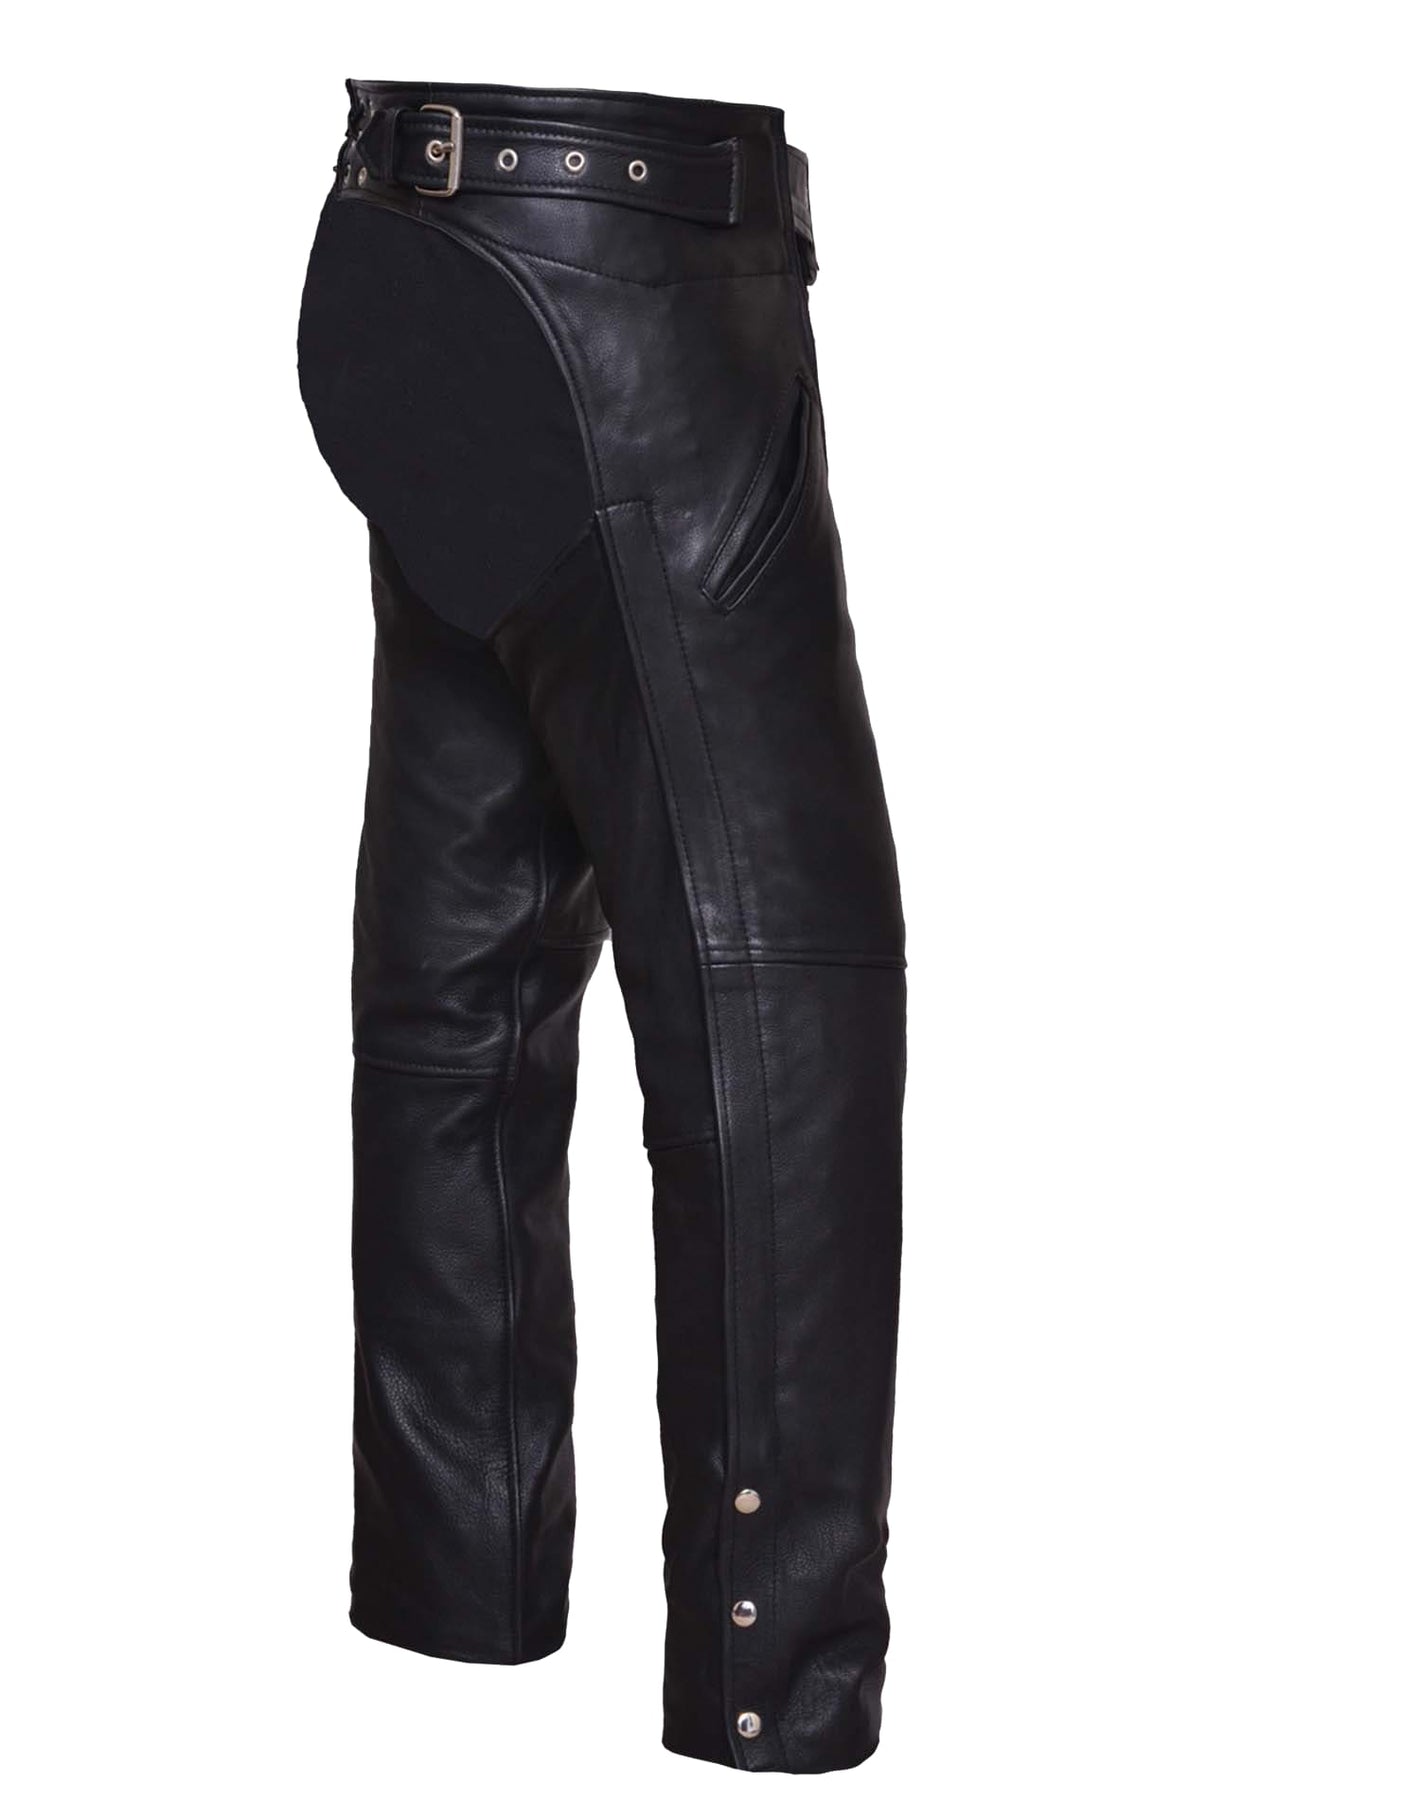 Unisex Ultra Leather Gun Holster Motorcycle Chaps